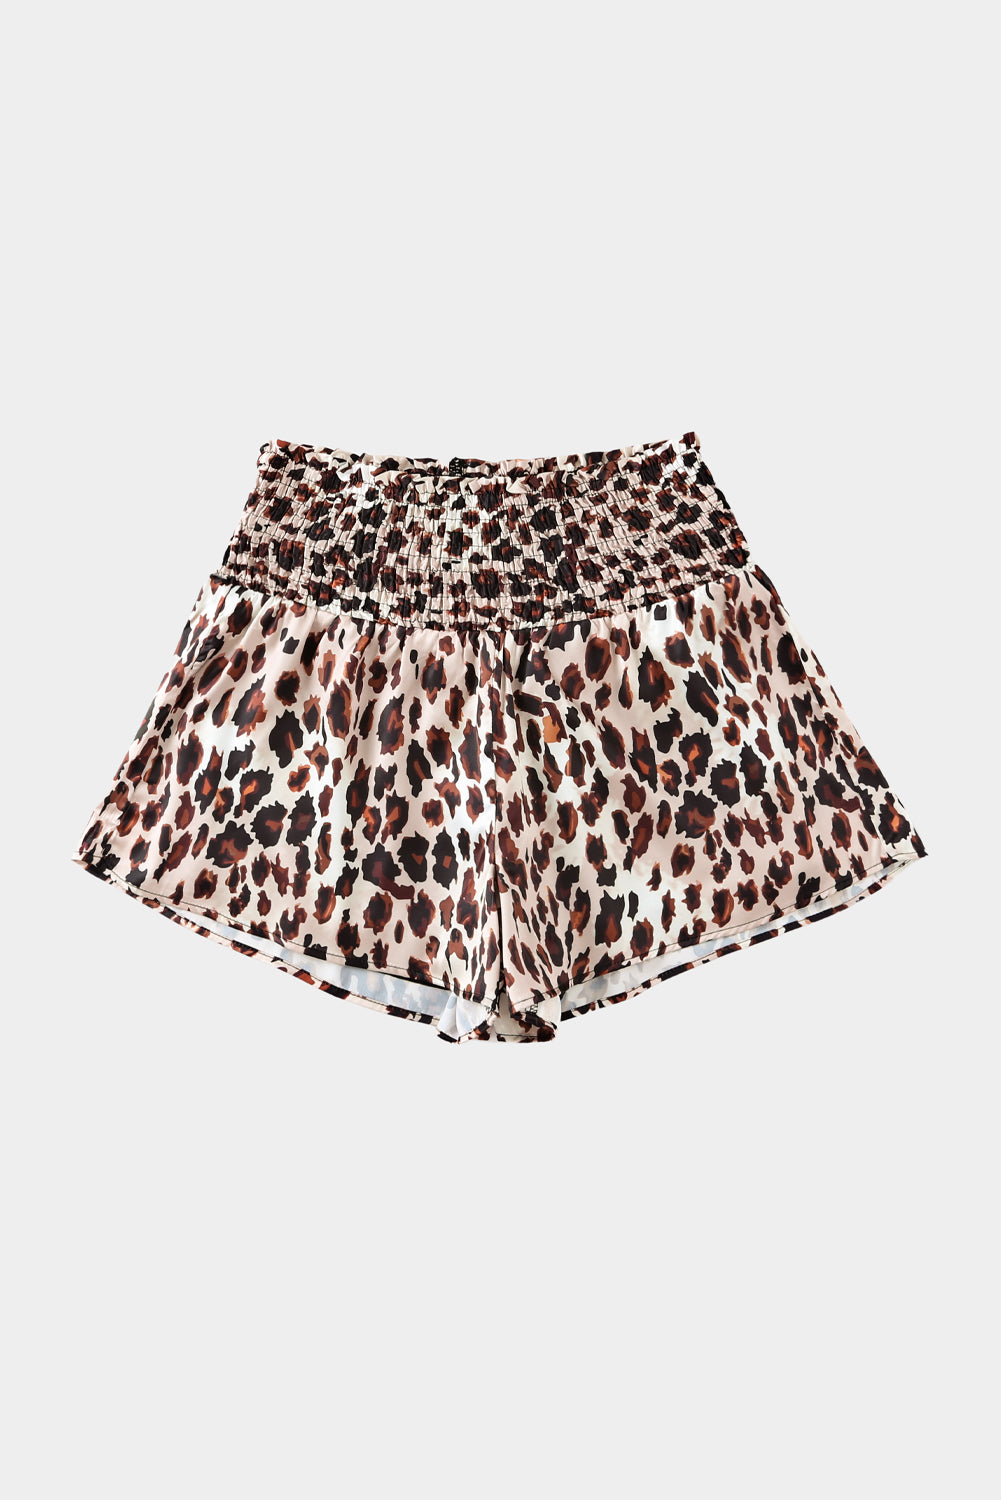 LC731257-20-S, LC731257-20-M, LC731257-20-L, LC731257-20-XL, Leopard  Print Smocked Waistband High Waist Casual Shorts